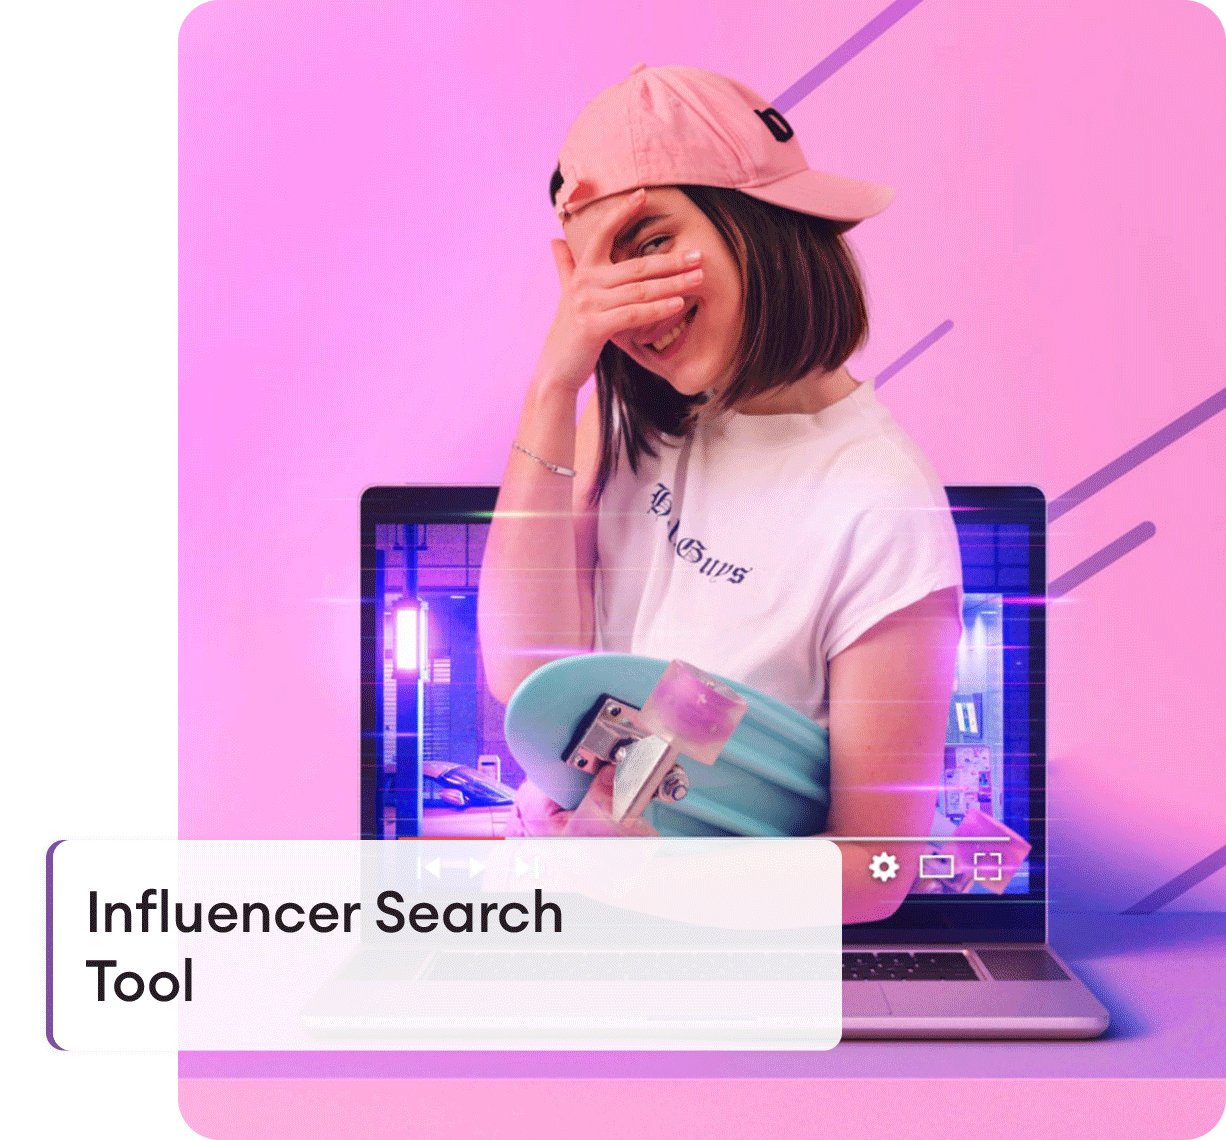 Influencer Search Tool